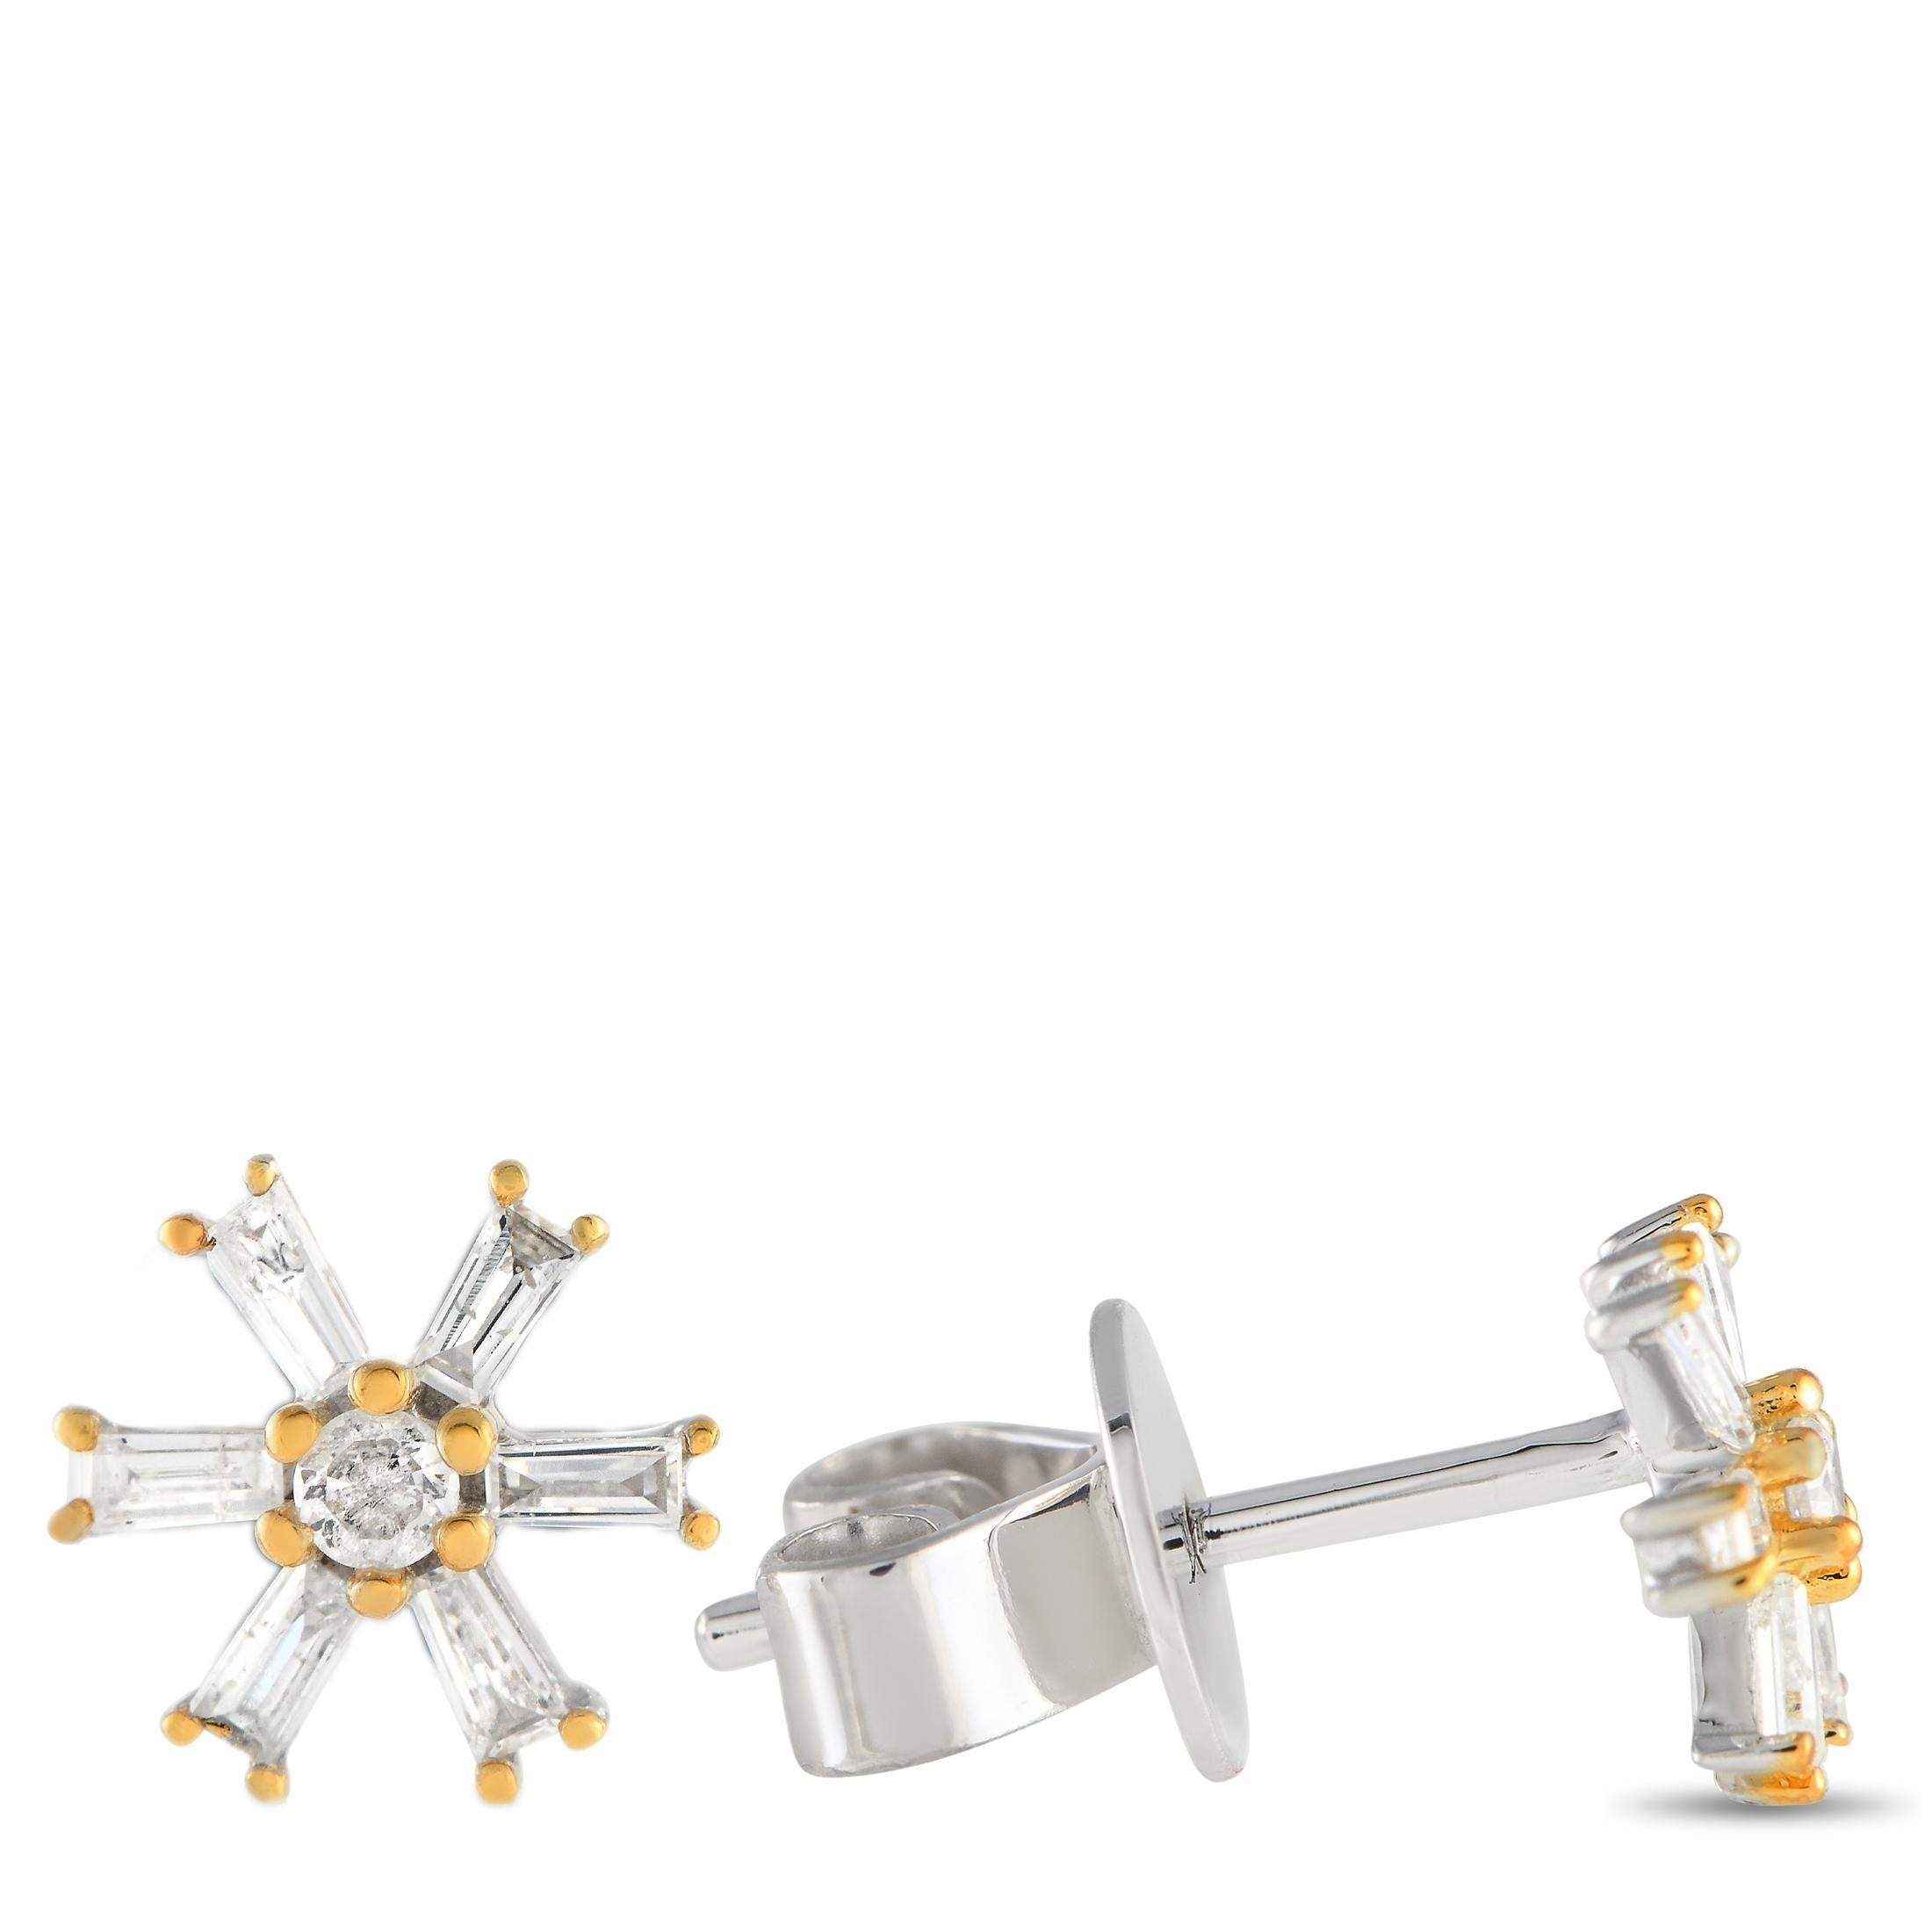 Level up the graceful charm of a dreamy outfit with this pair of pinwheel diamond earrings. These 14K white gold studs feature a round central diamond secured by six 14K yellow gold prongs. Five step-cut diamonds with yellow gold prongs encircle the